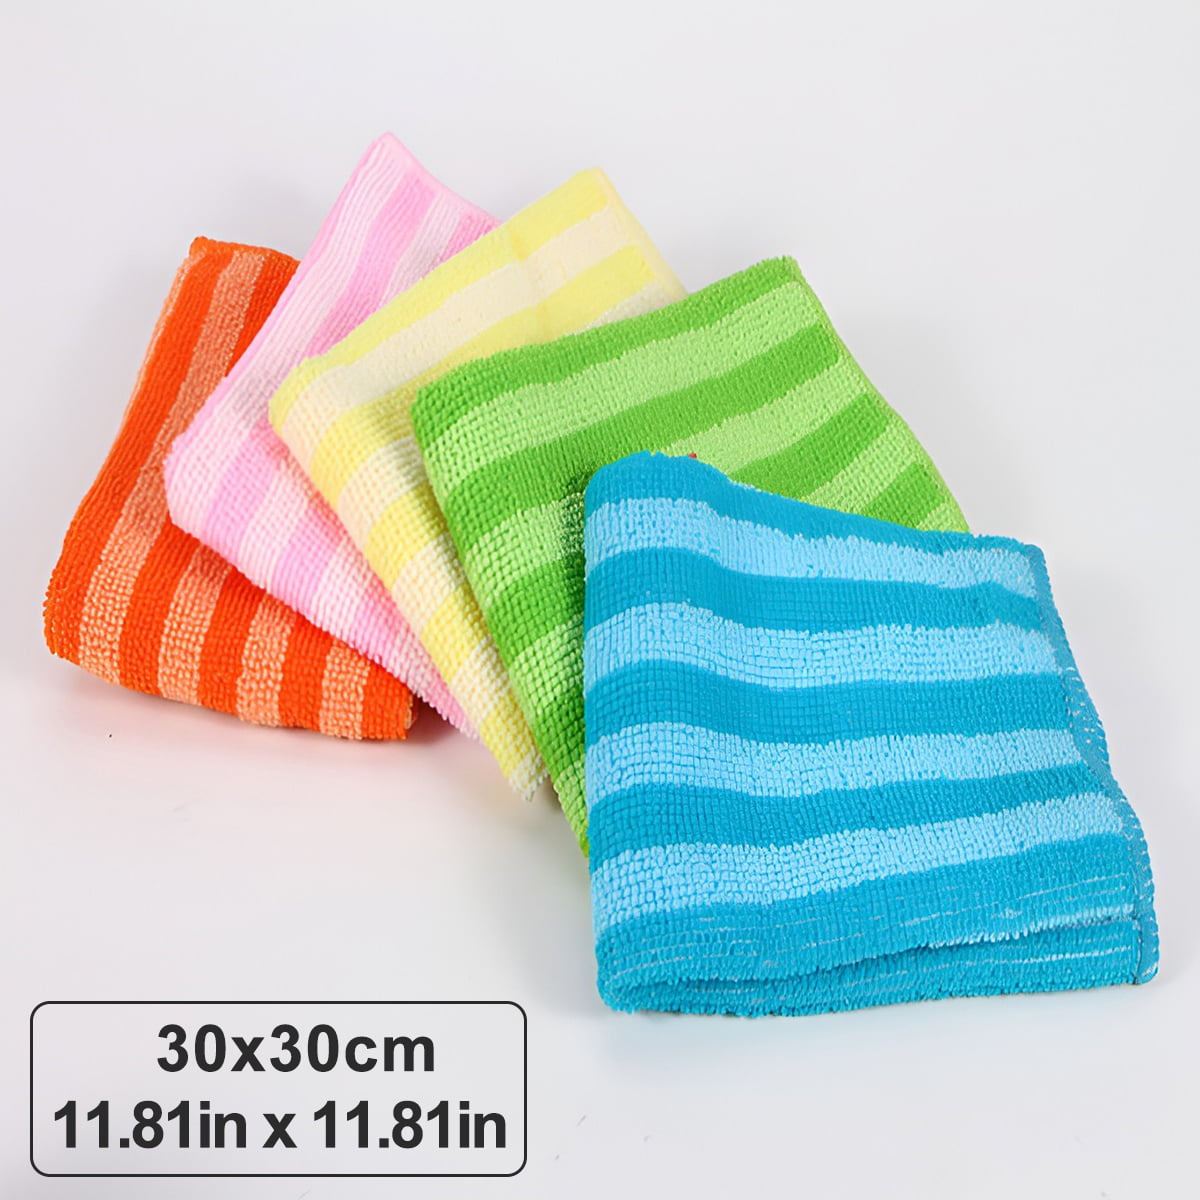 Kyoffiie 5pcs Kitchen Dish Cloths Soft Absorbent Dish Rag Reusable Dish Towels Household Washable Cleaning Cloth Housework Clean Towel Kitchen